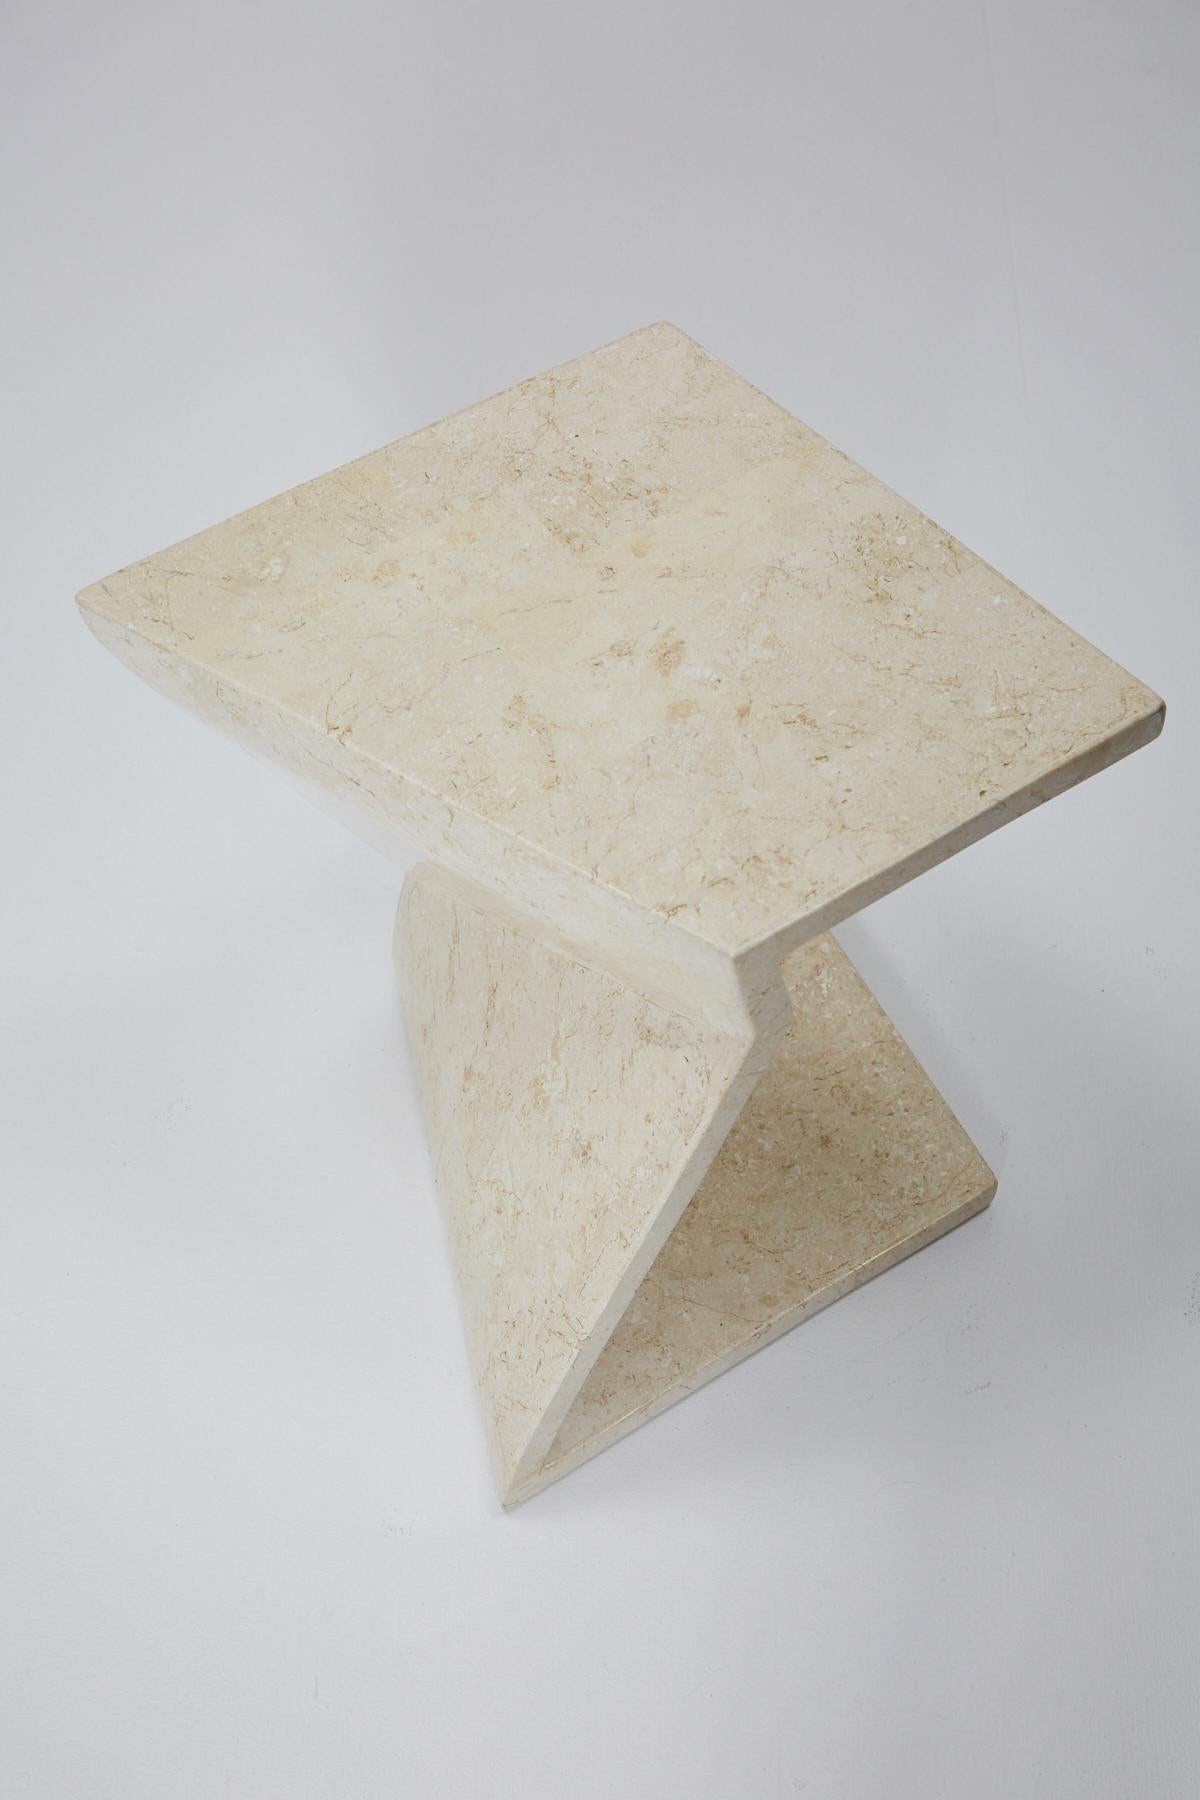 Zig Zag Side Tables or Coffee Table in Tessellated White Stone, 1990s 3